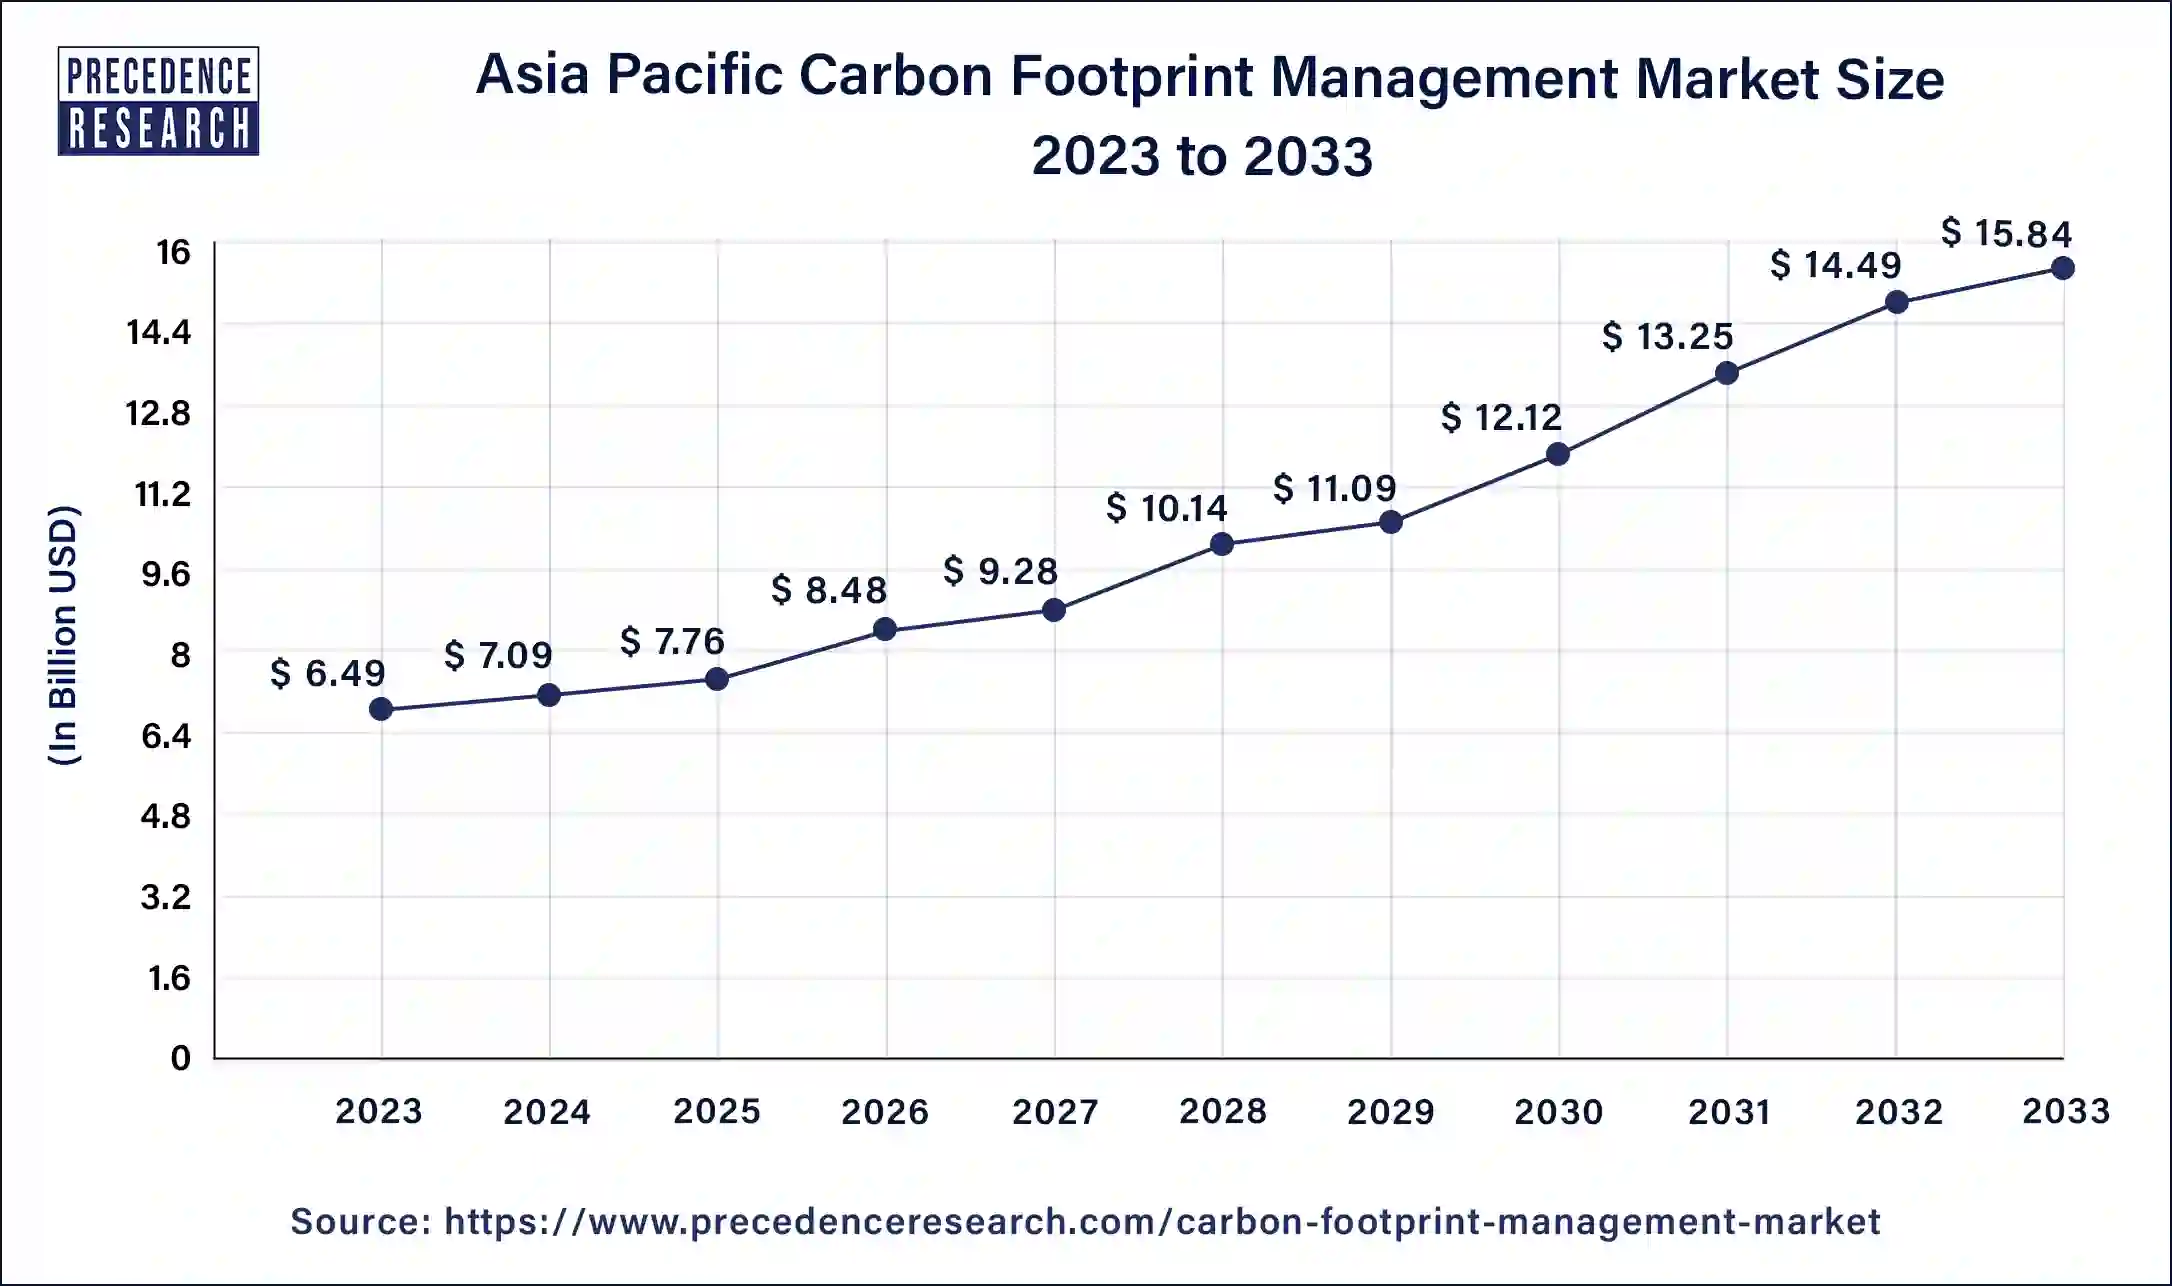 Asia Pacific Carbon Footprint Management Market Size 2024 to 2033